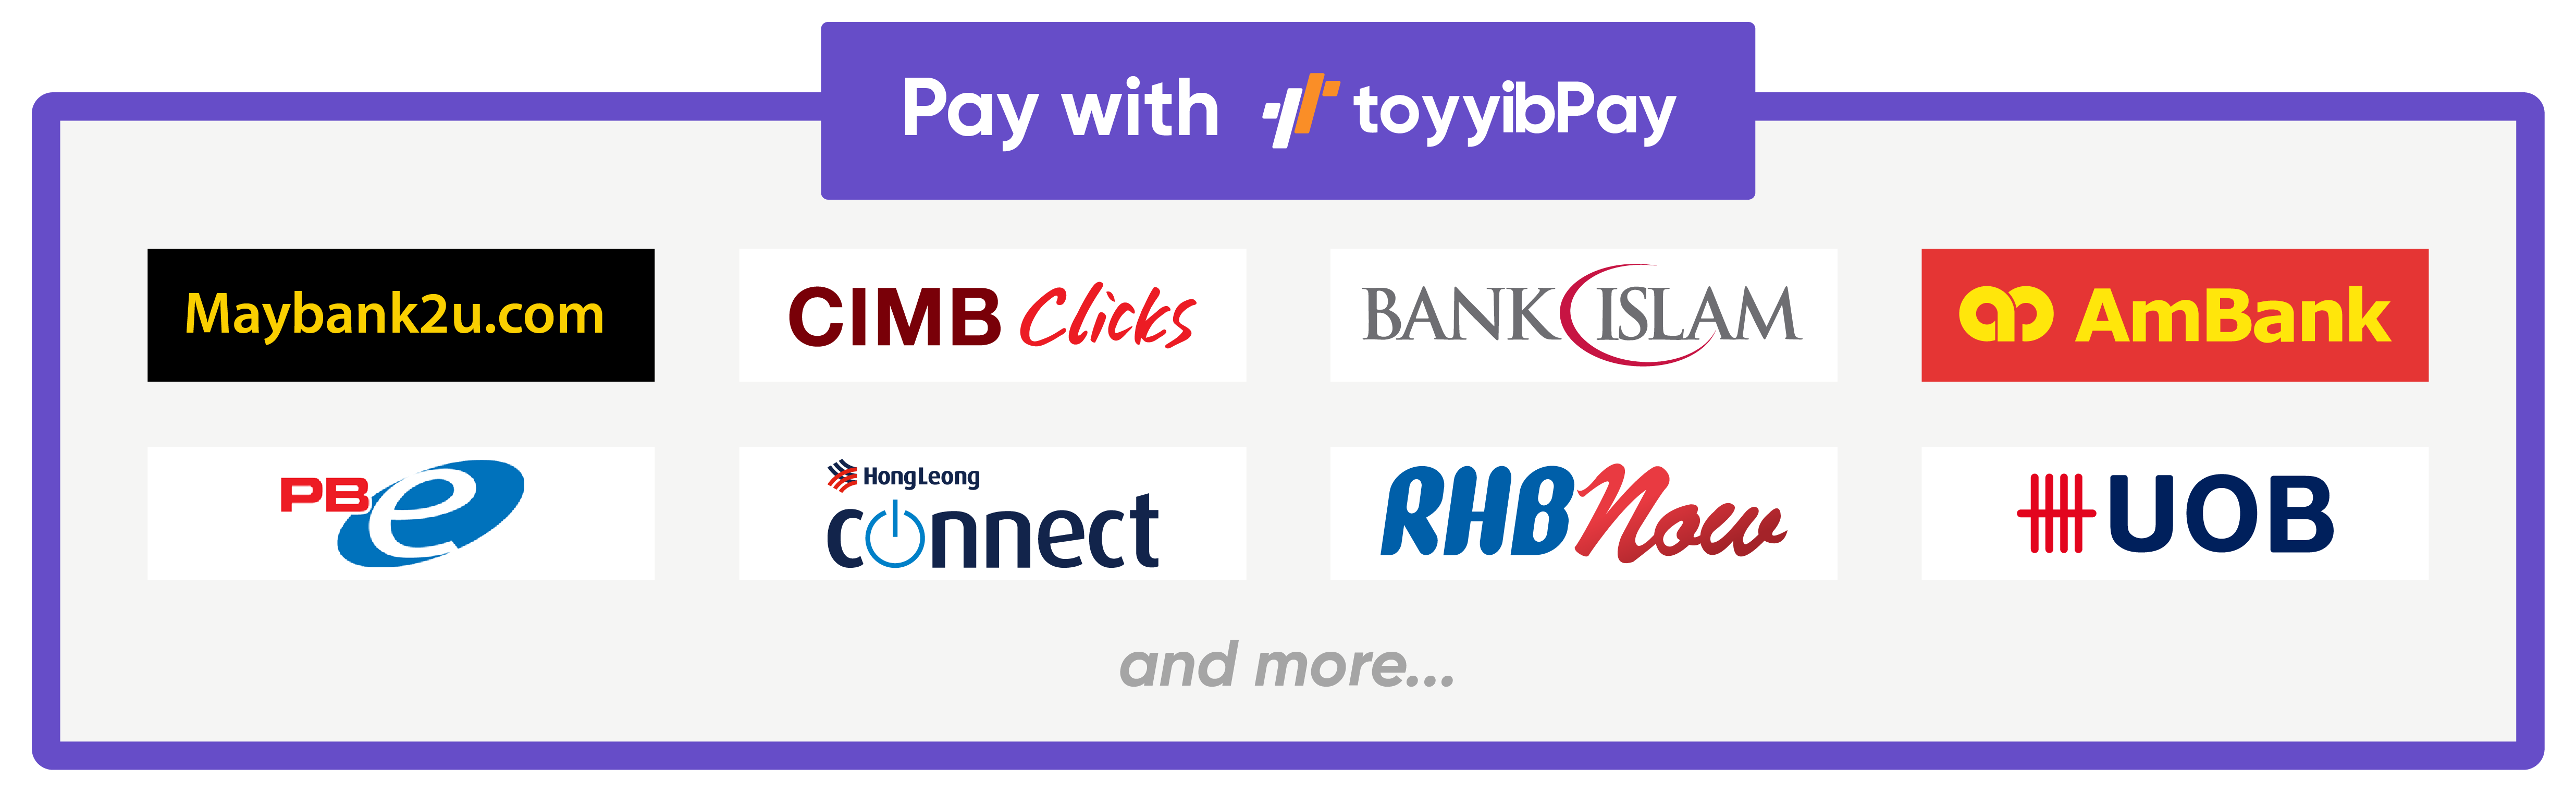 [toyyibPay payment gateway]100% Secure Online Banking FPX Payment (Barang sampai 1-3 hari)